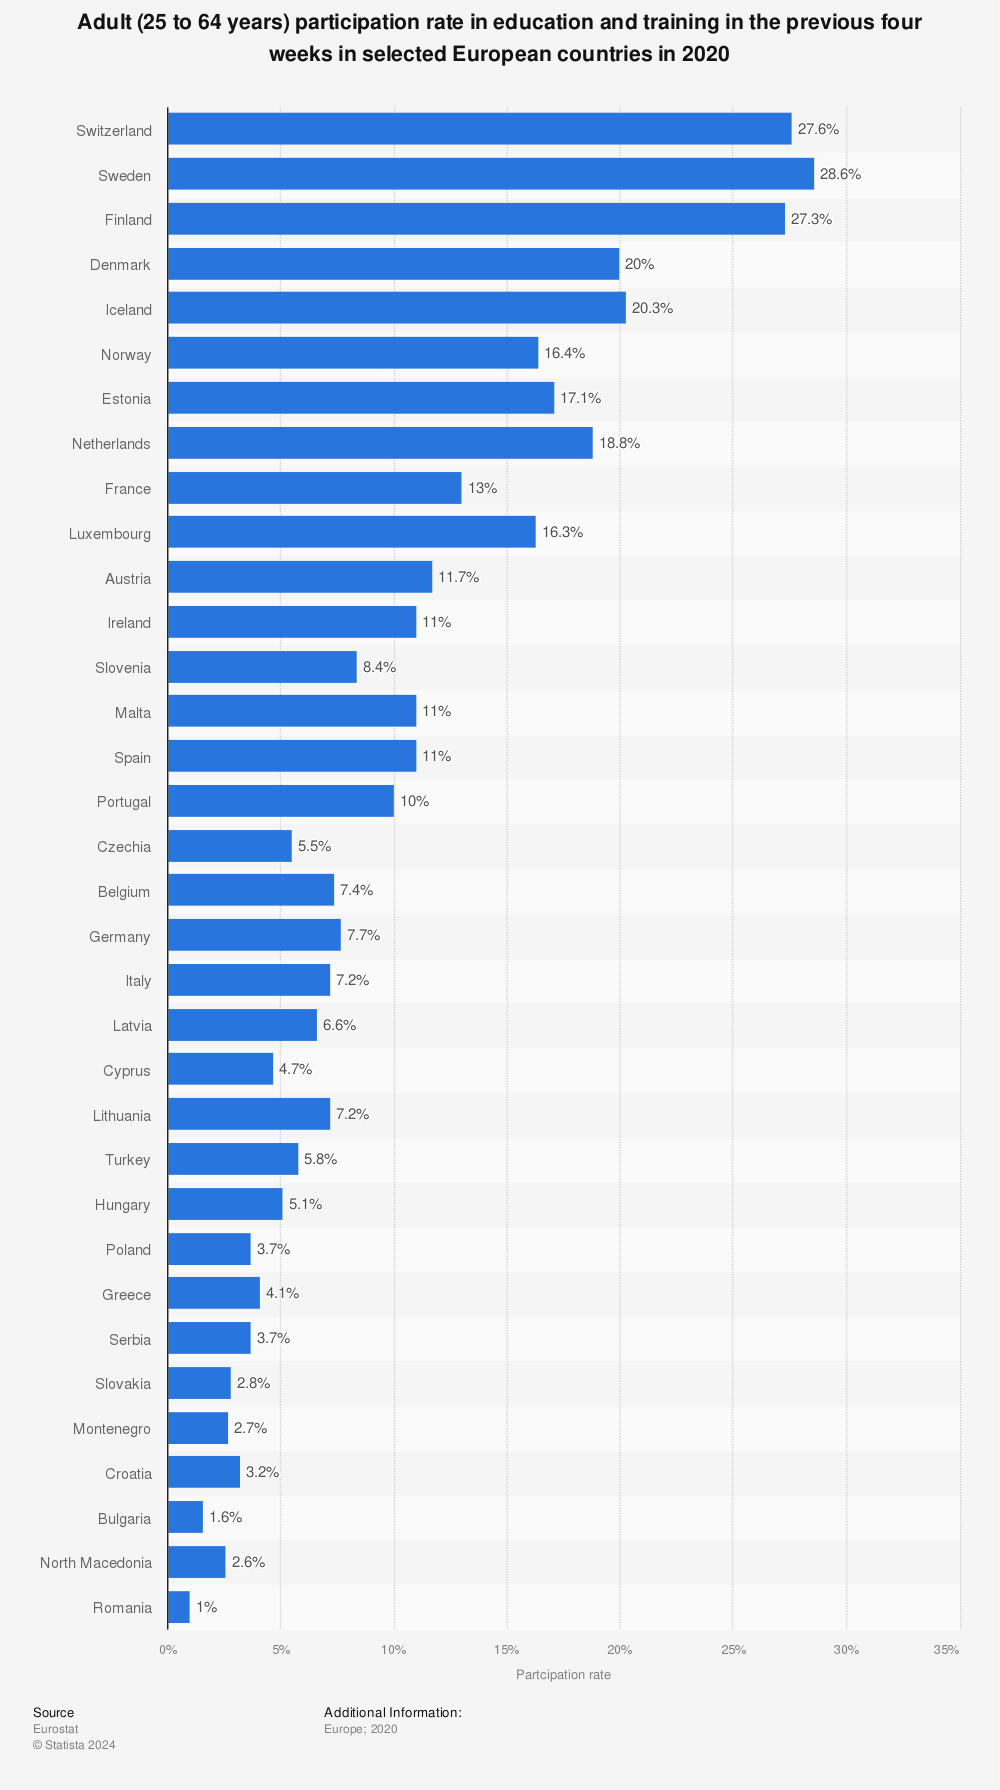 Statistic: Adult (25 to 64 years) participation rate in education and training in the previous four weeks in selected European countries in 2020 | Statista